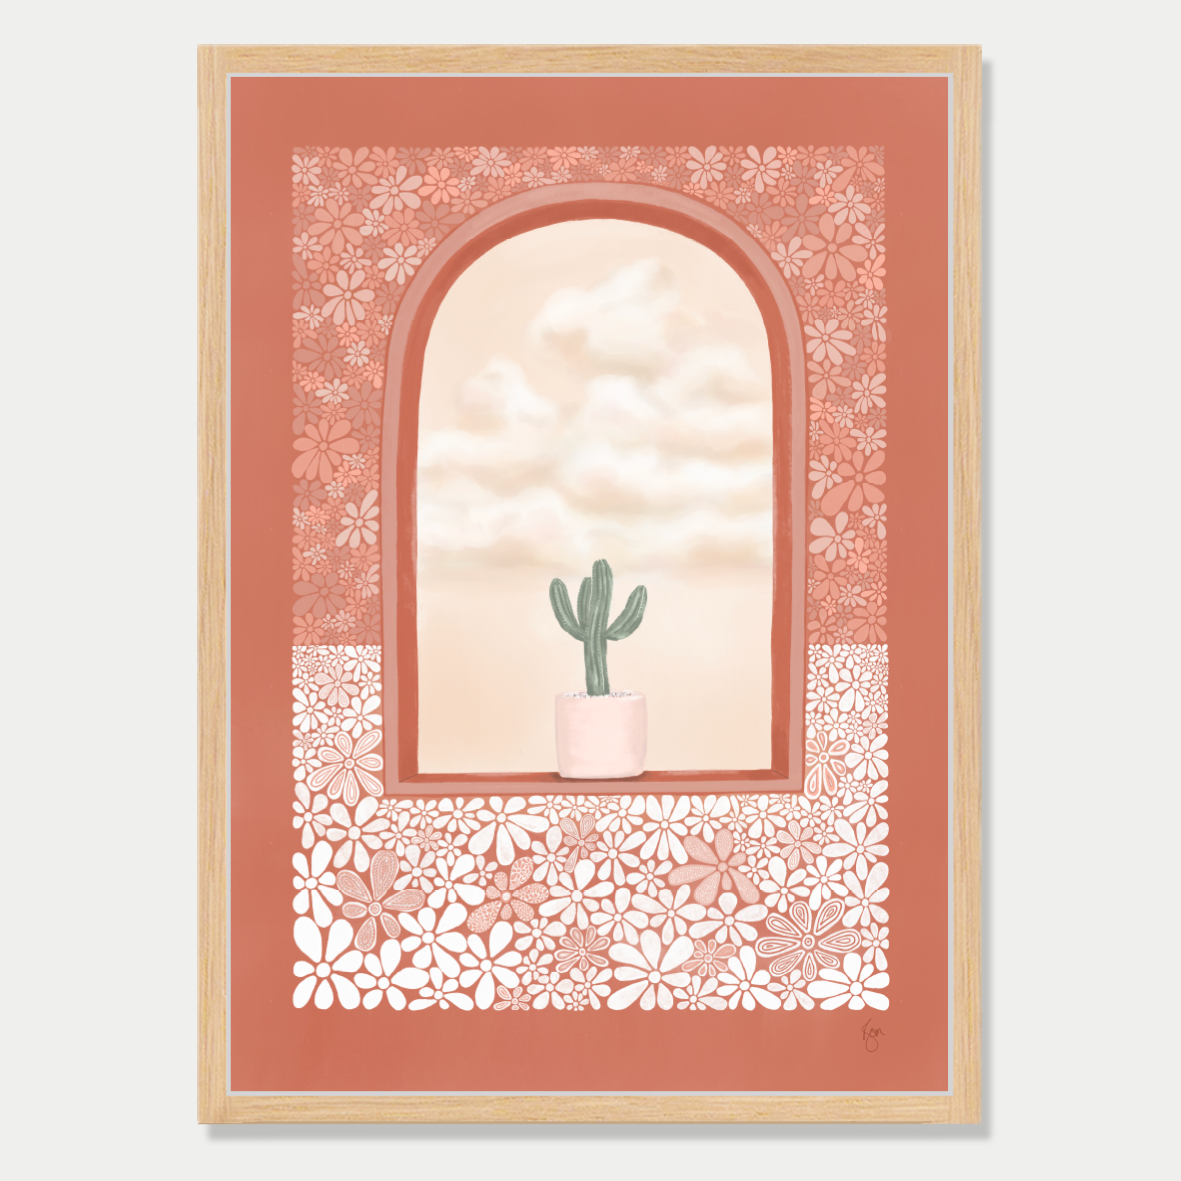 Art print of an arched window with a plant sitting in it and a view of fluffy clouds, in a terracotta colour palette, by Bon Jung. Printed in New Zealand by endemicworld and framed in raw oak.